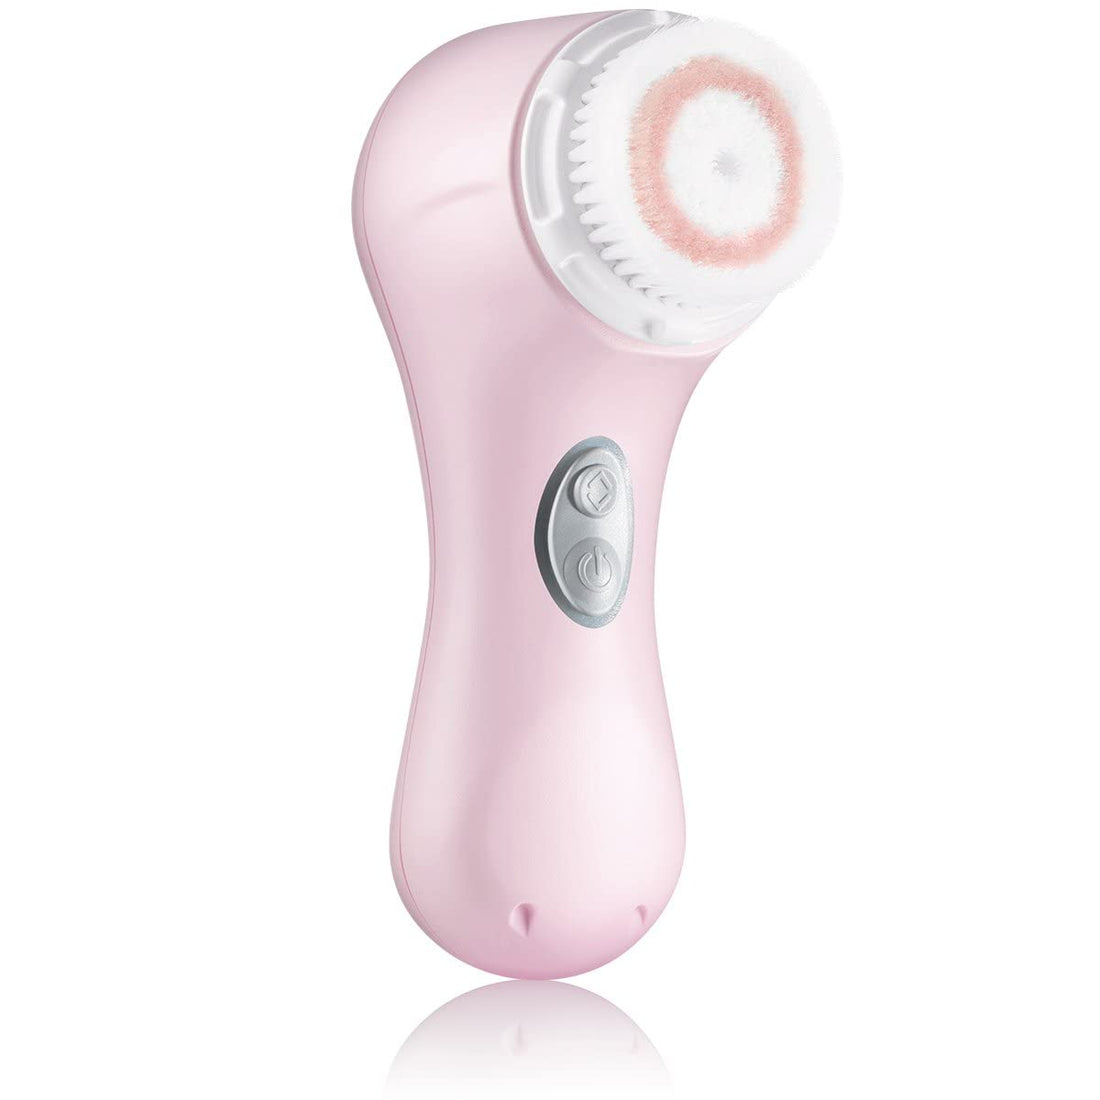 Clarisonic Mia 2 Sonic Facial Skin Cleansing Brush System, Pink